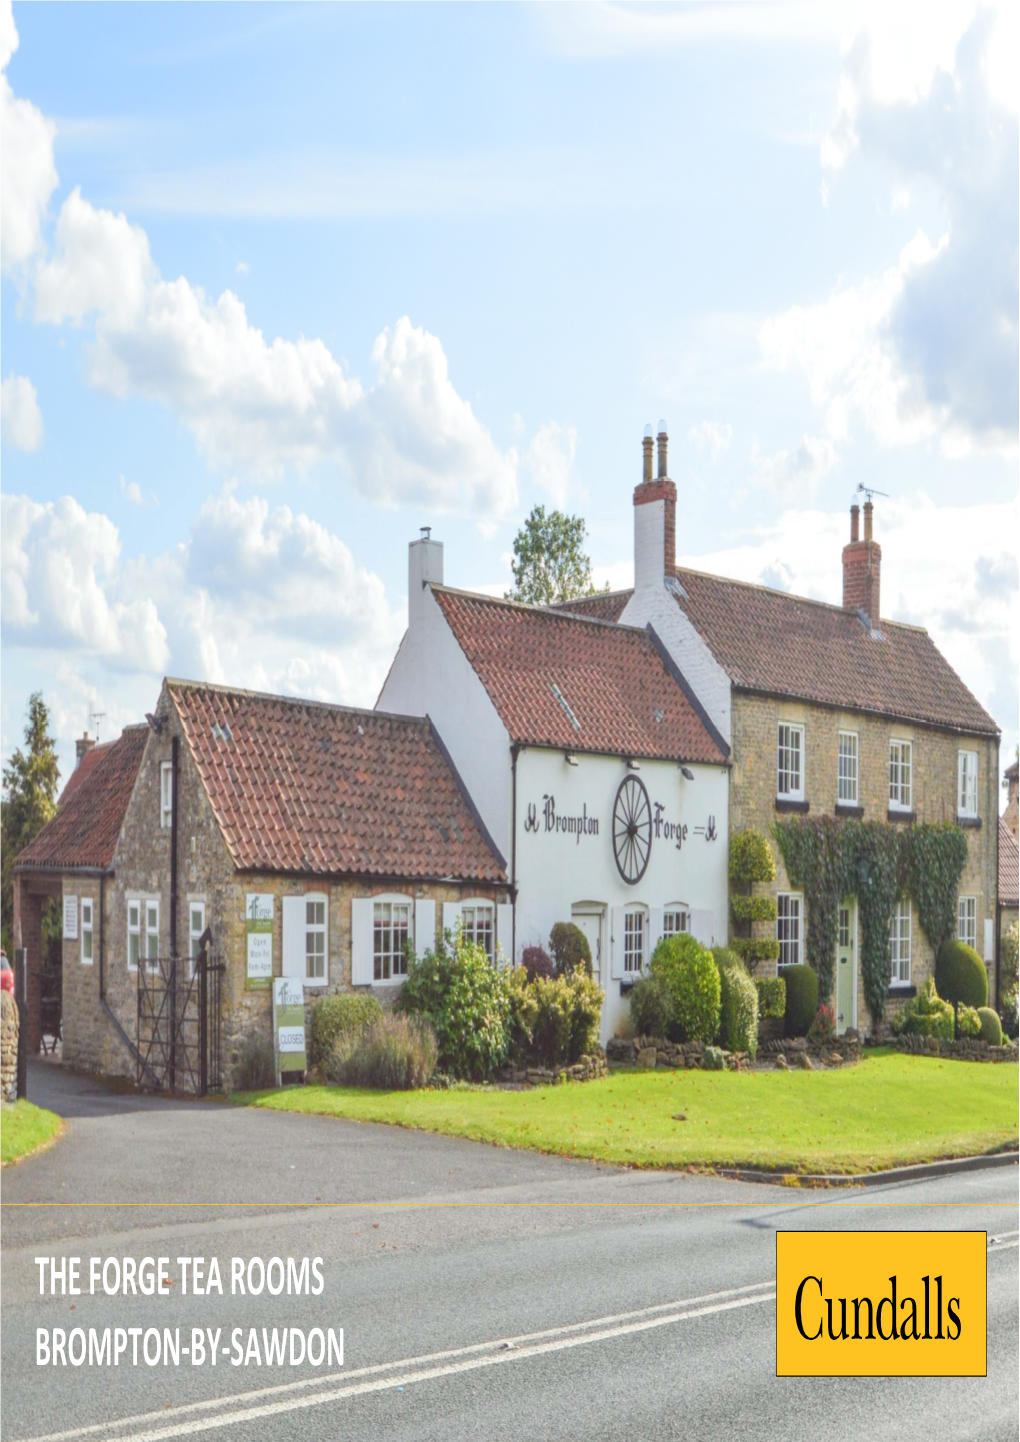 The Forge Tea Rooms Brompton-By-Sawdon